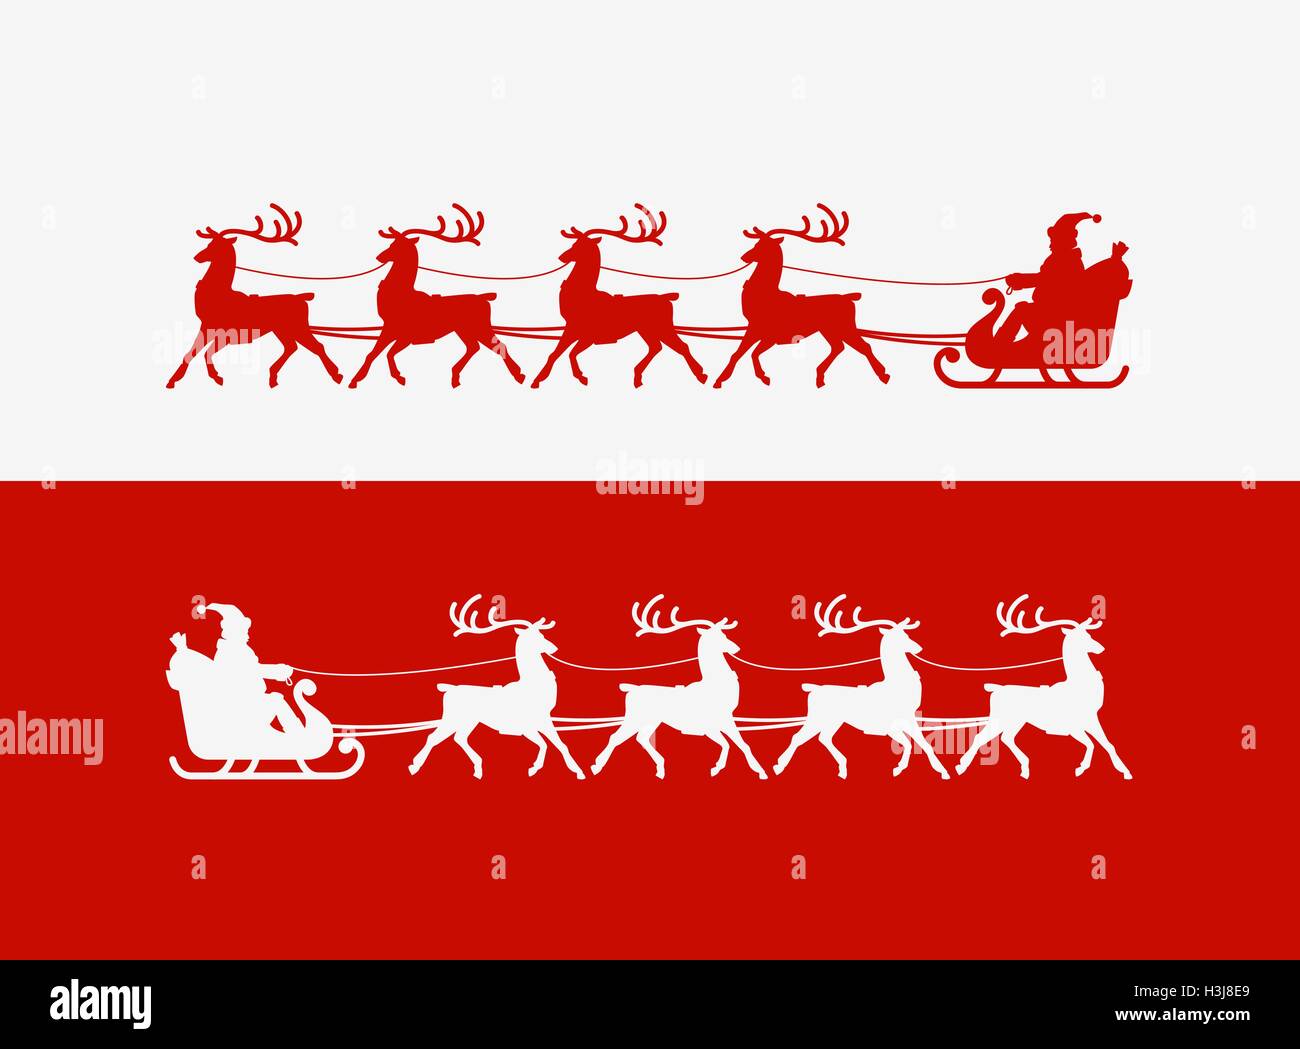 Merry Christmas greeting card. Santa Claus rides in a sleigh pulled by reindeer. Vector illustration Stock Vector